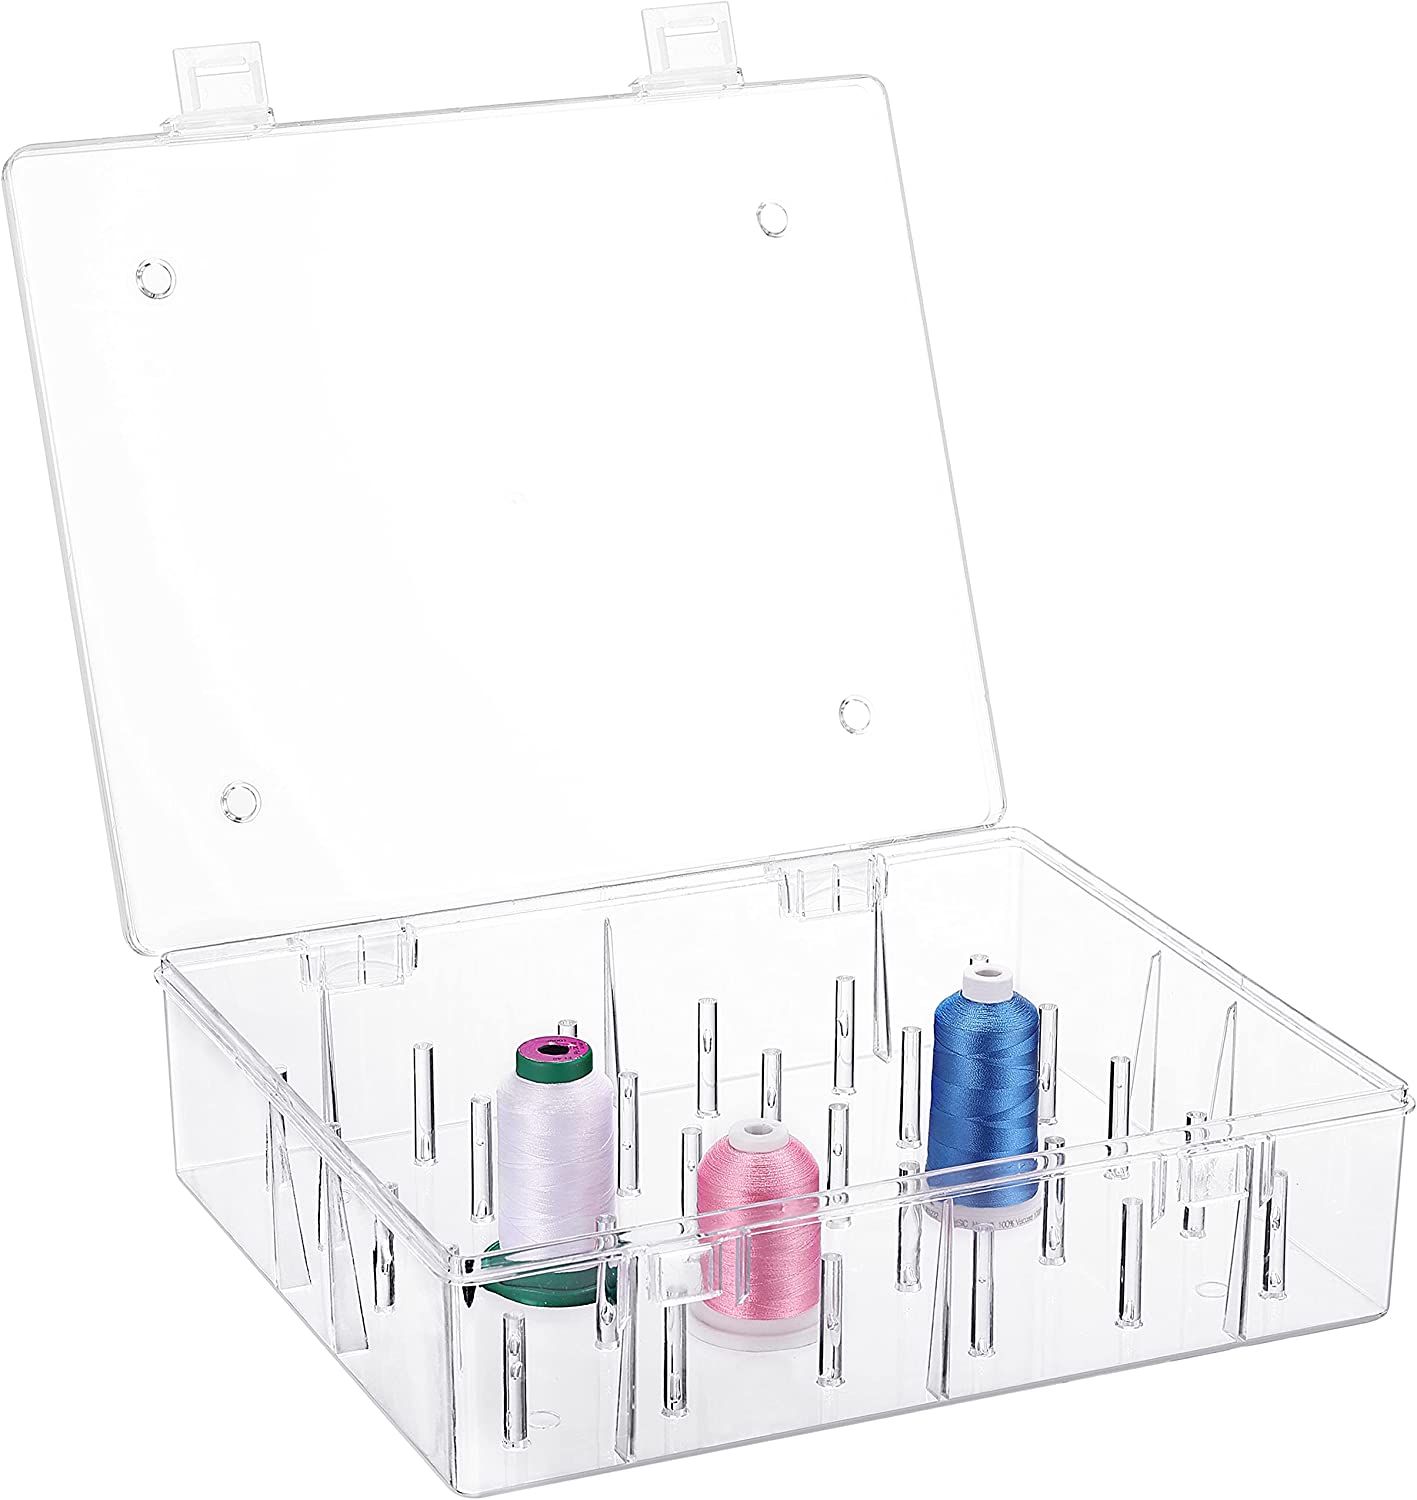 New brothread 4 Layers Stackable Clear Storage Box/Organizer for Holding 80  Spools Home Embroidery & Sewing Thread and Other Embroidery Sewing Crafts  (Spool Size Requirement: H2.2 W1.69)